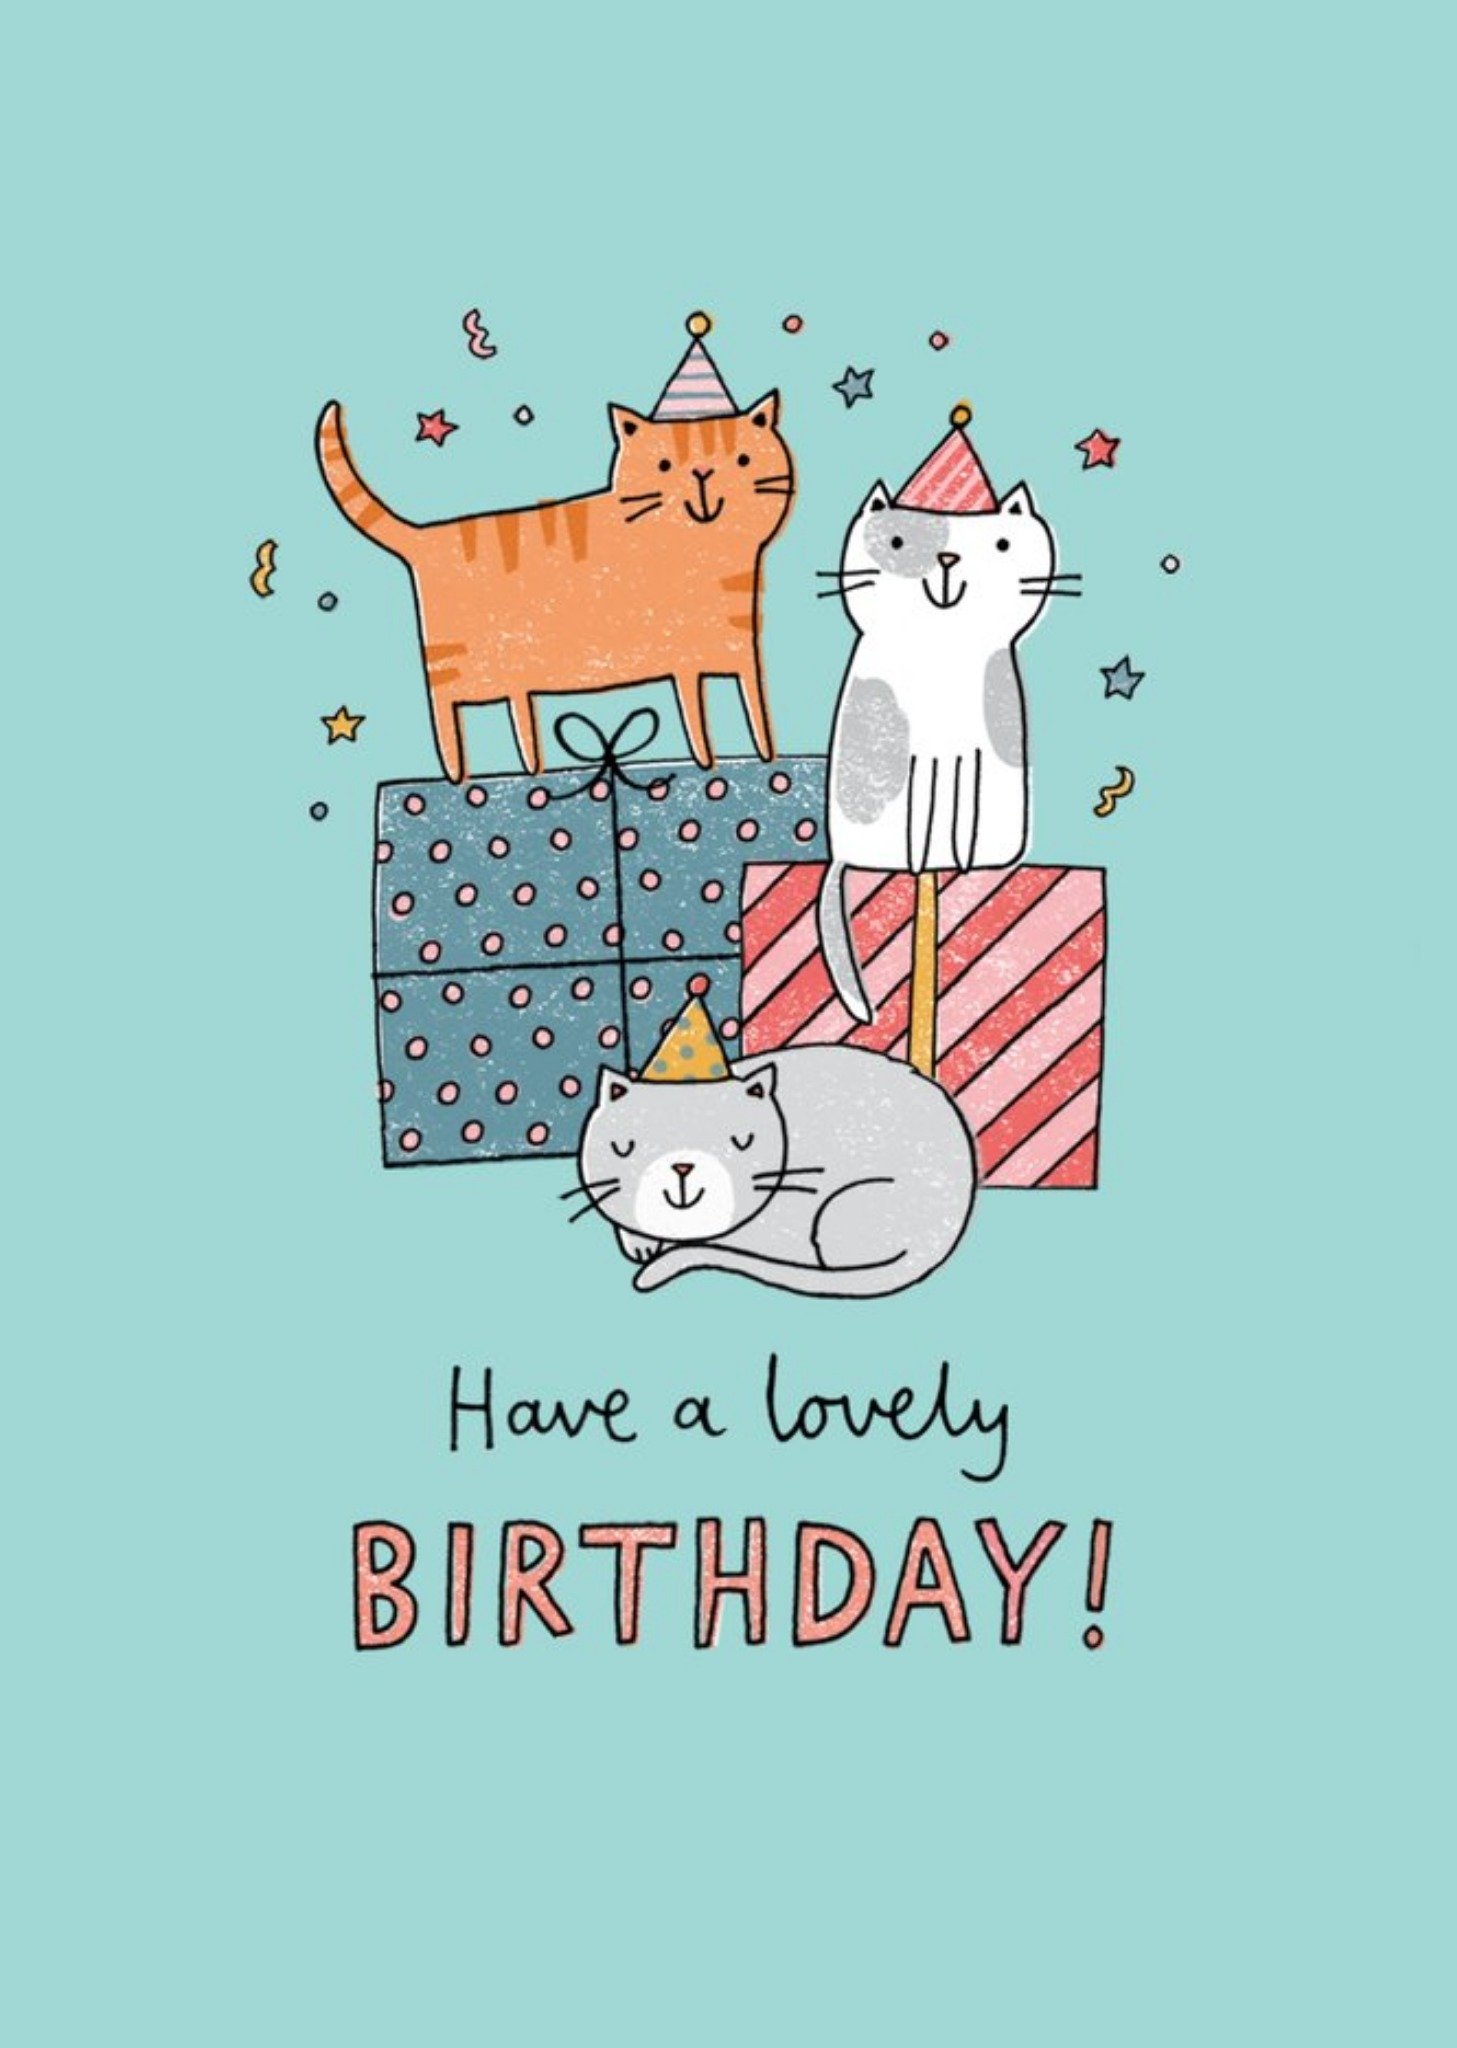 Moonpig Jenny Seddon Cute Illustrated Cats And Gifts Birthday Card, Large